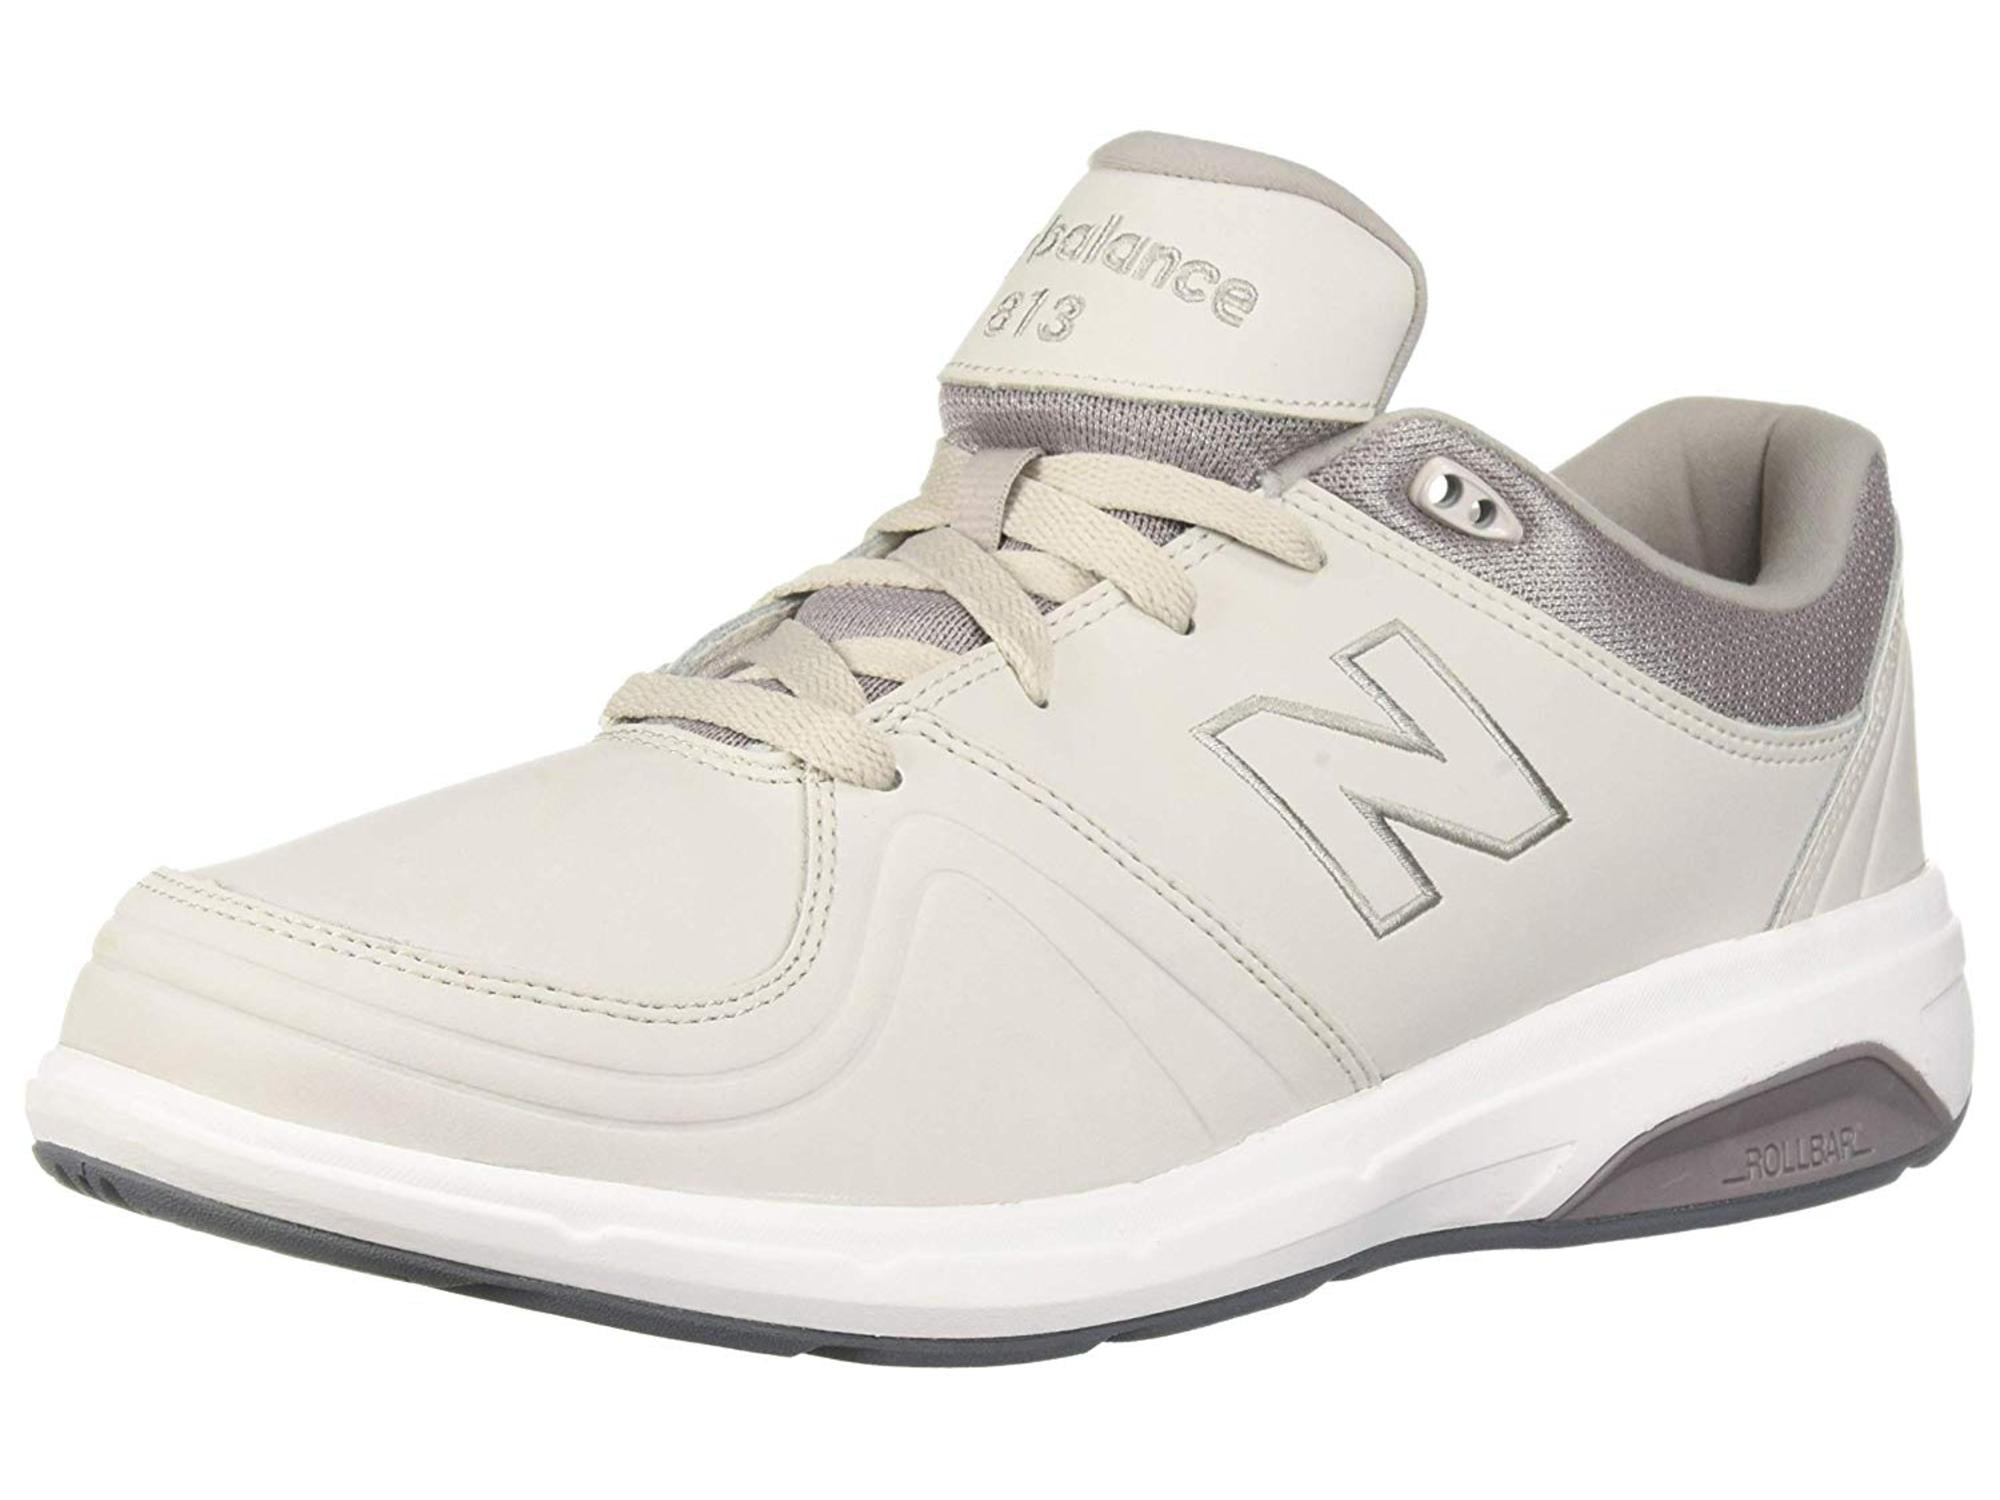 New Balance Womens WW813 Leather Low Top Lace Up Walking | Walmart Canada